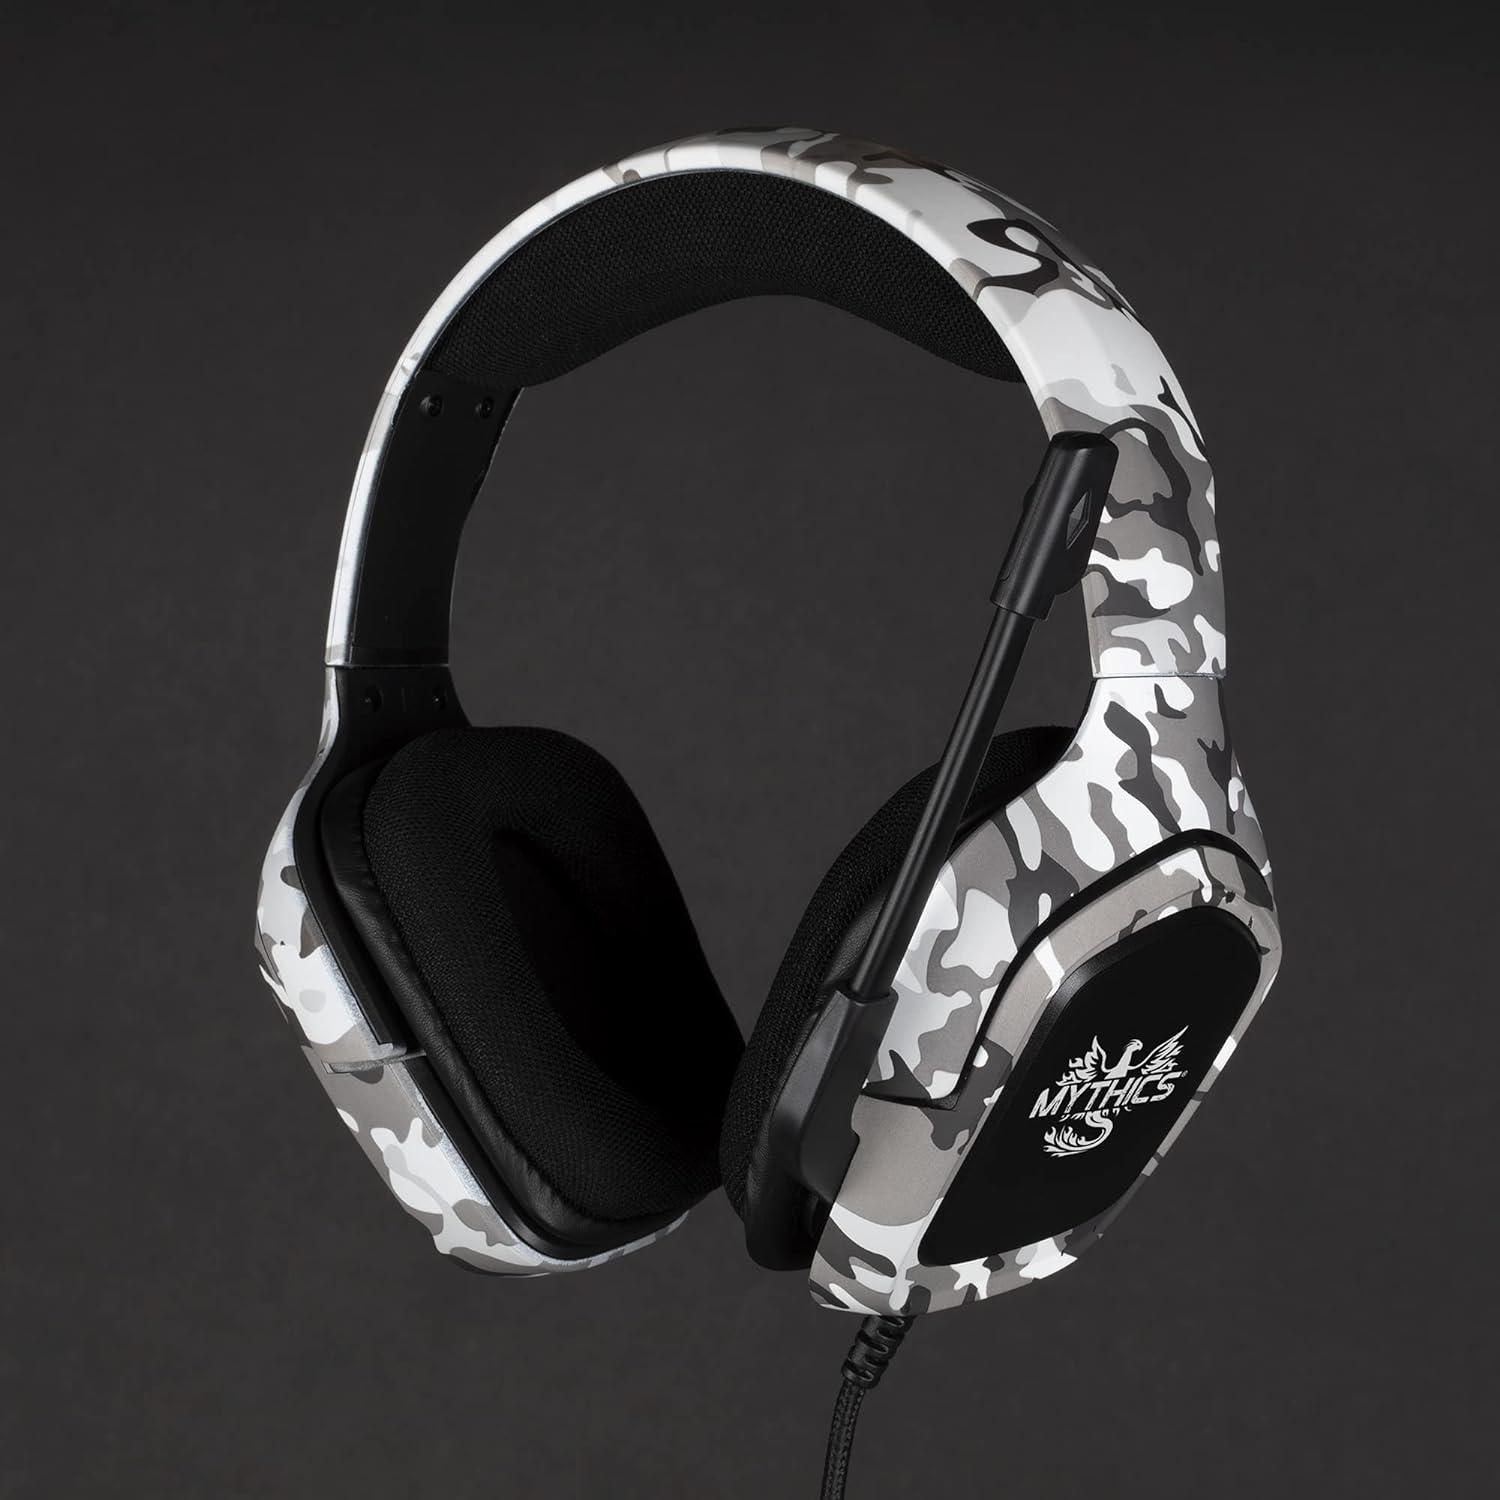 Konix Mythics Ares Camo Gaming Headset - GameStore.mt | Powered by Flutisat